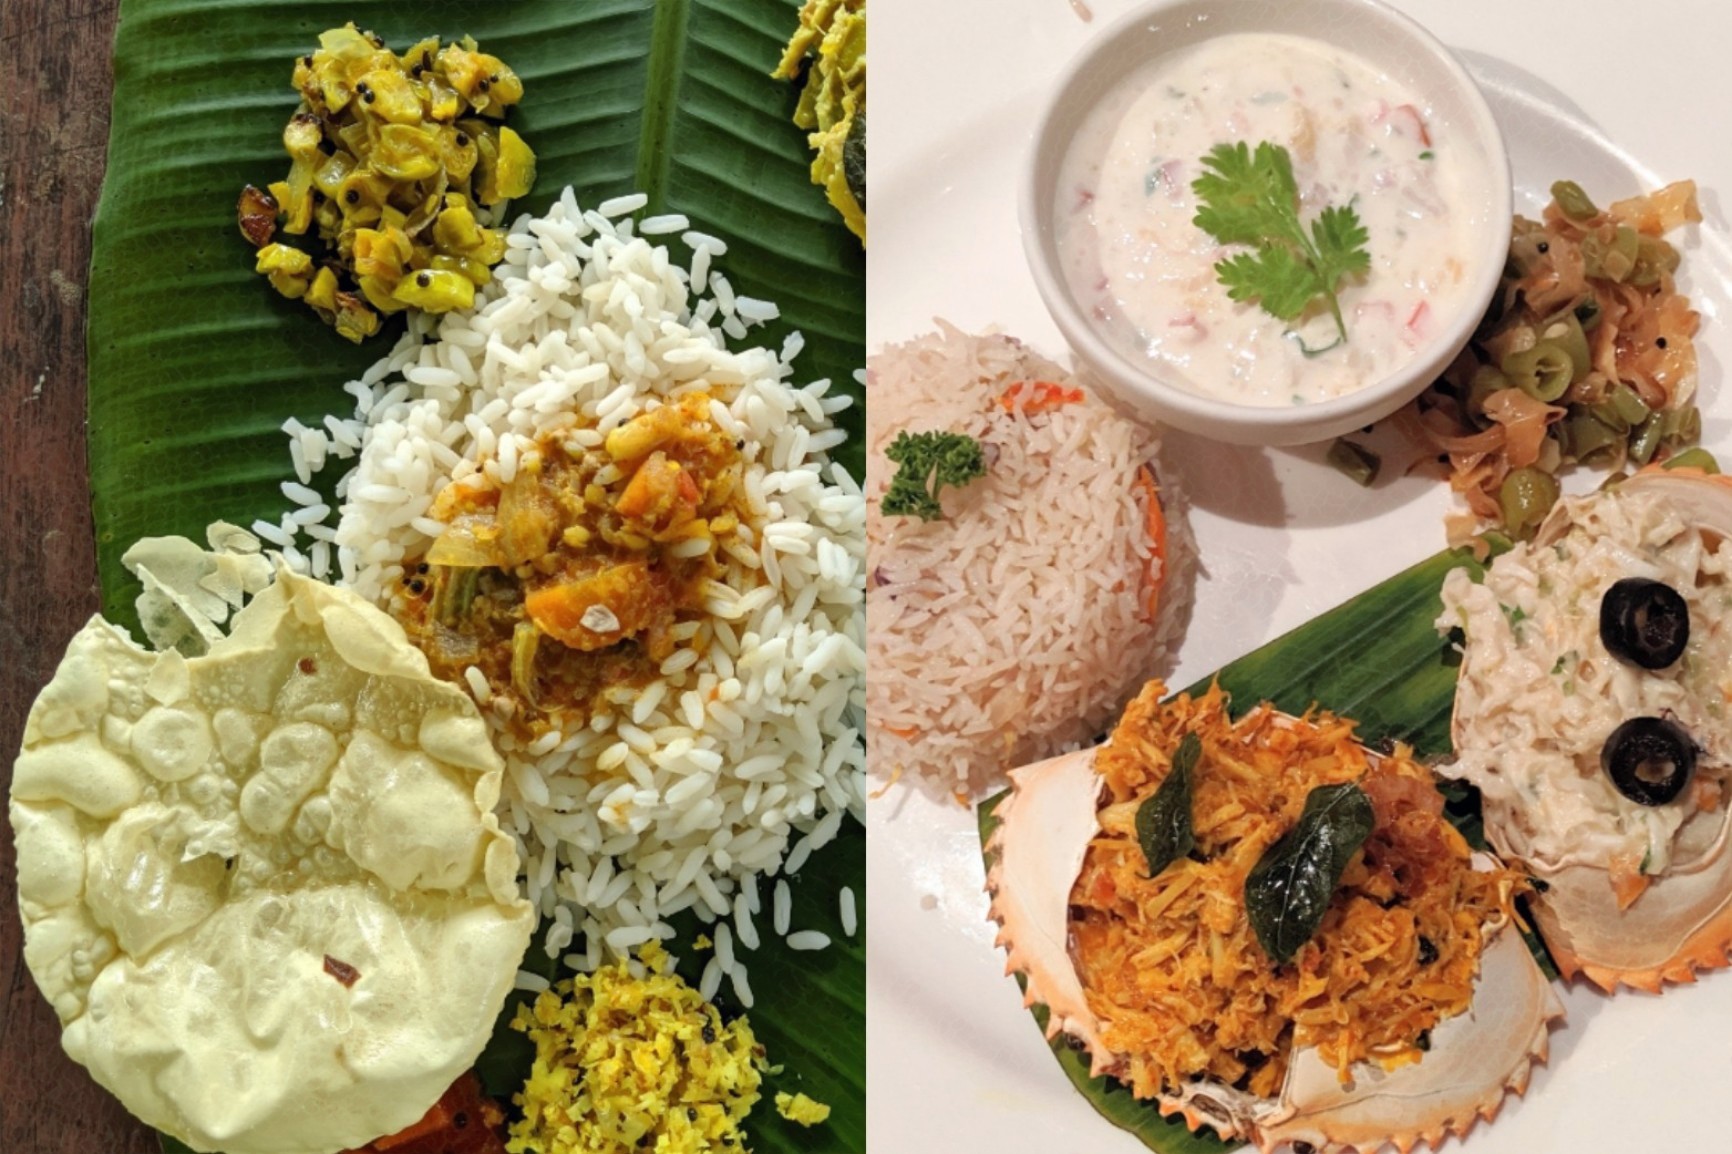 The Best Restaurants In Kochi, Kerala - Caffeinated Excursions